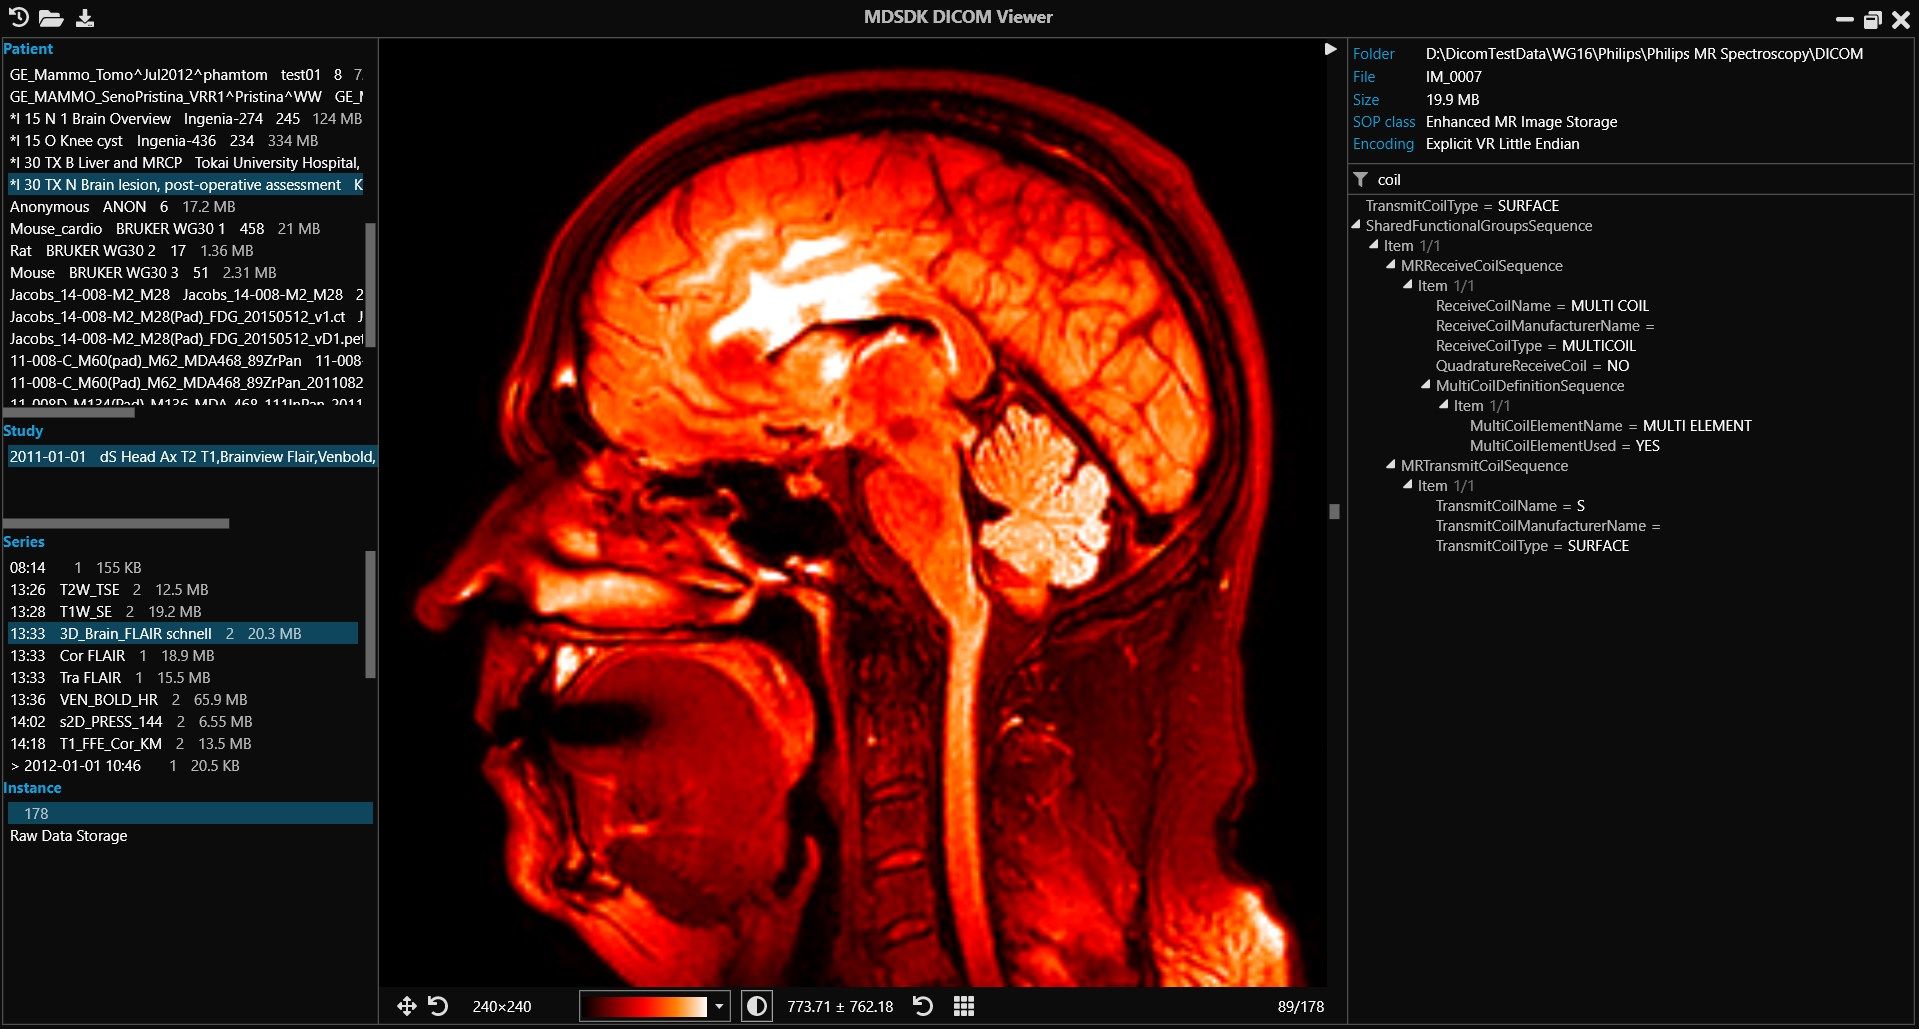 The main window of the MDSDK DICOM Viewer consists of a DICOM data browser on the left, a visualization panel in the middle, and a collapsible details view on the right.